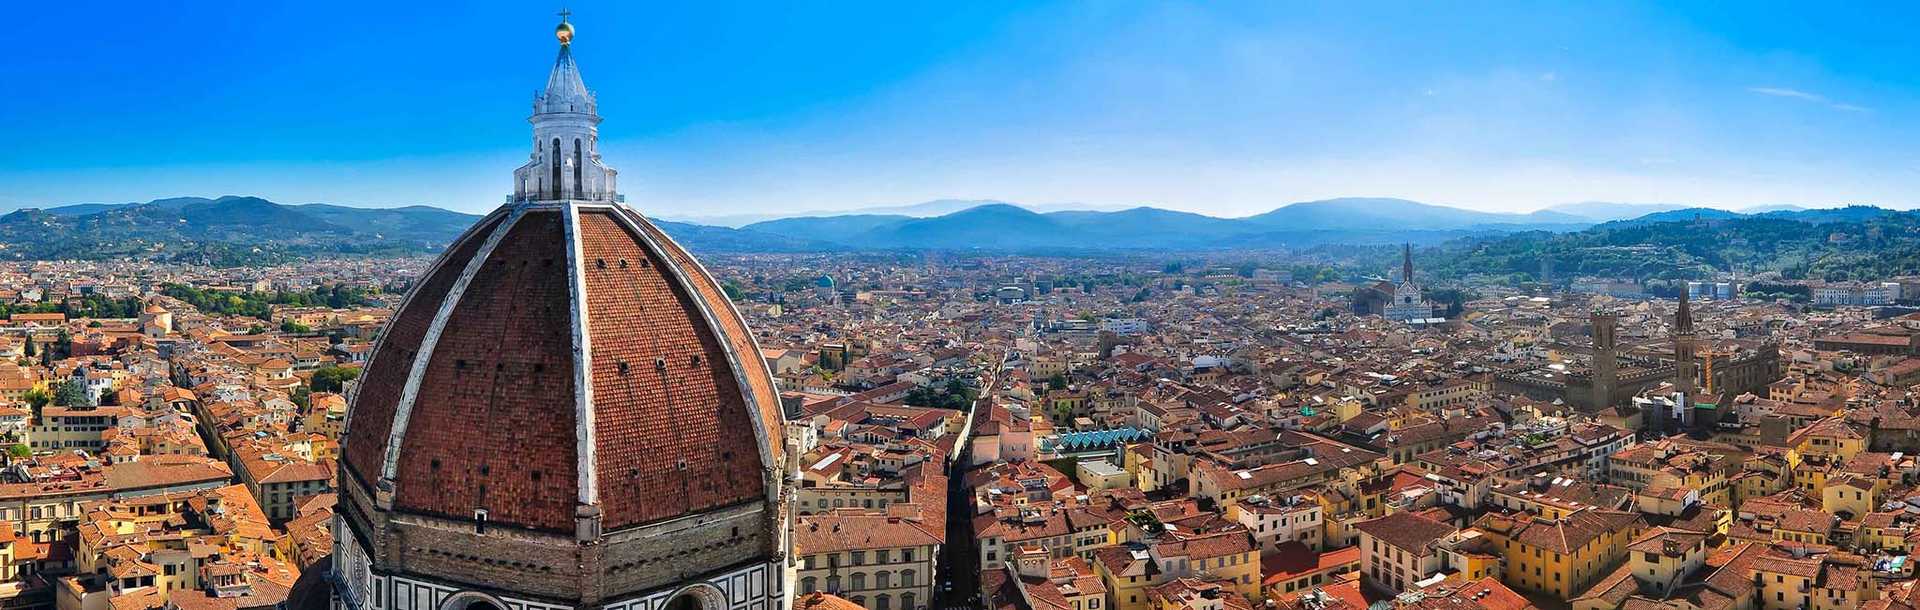 Duomo and city skyline in Florence, Italy